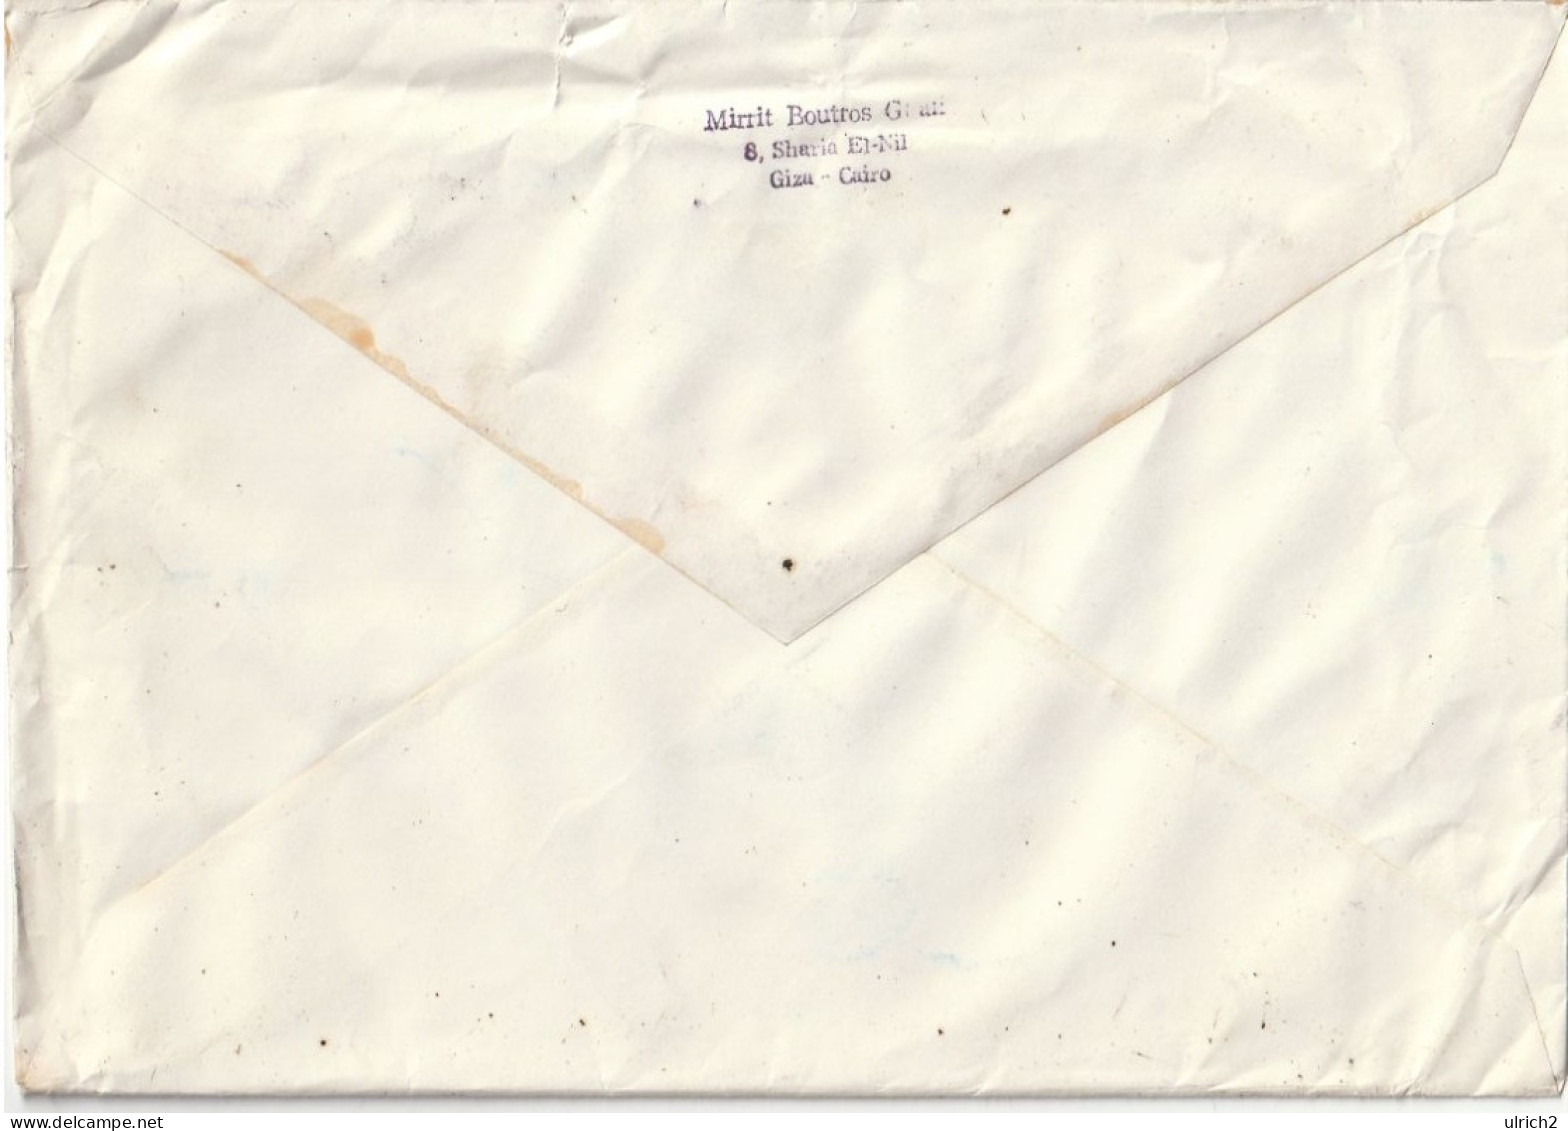 Airmail Letter - Ägypten - To Germany - Mirrit Boutros Ghali - 1978 (66977) - Storia Postale